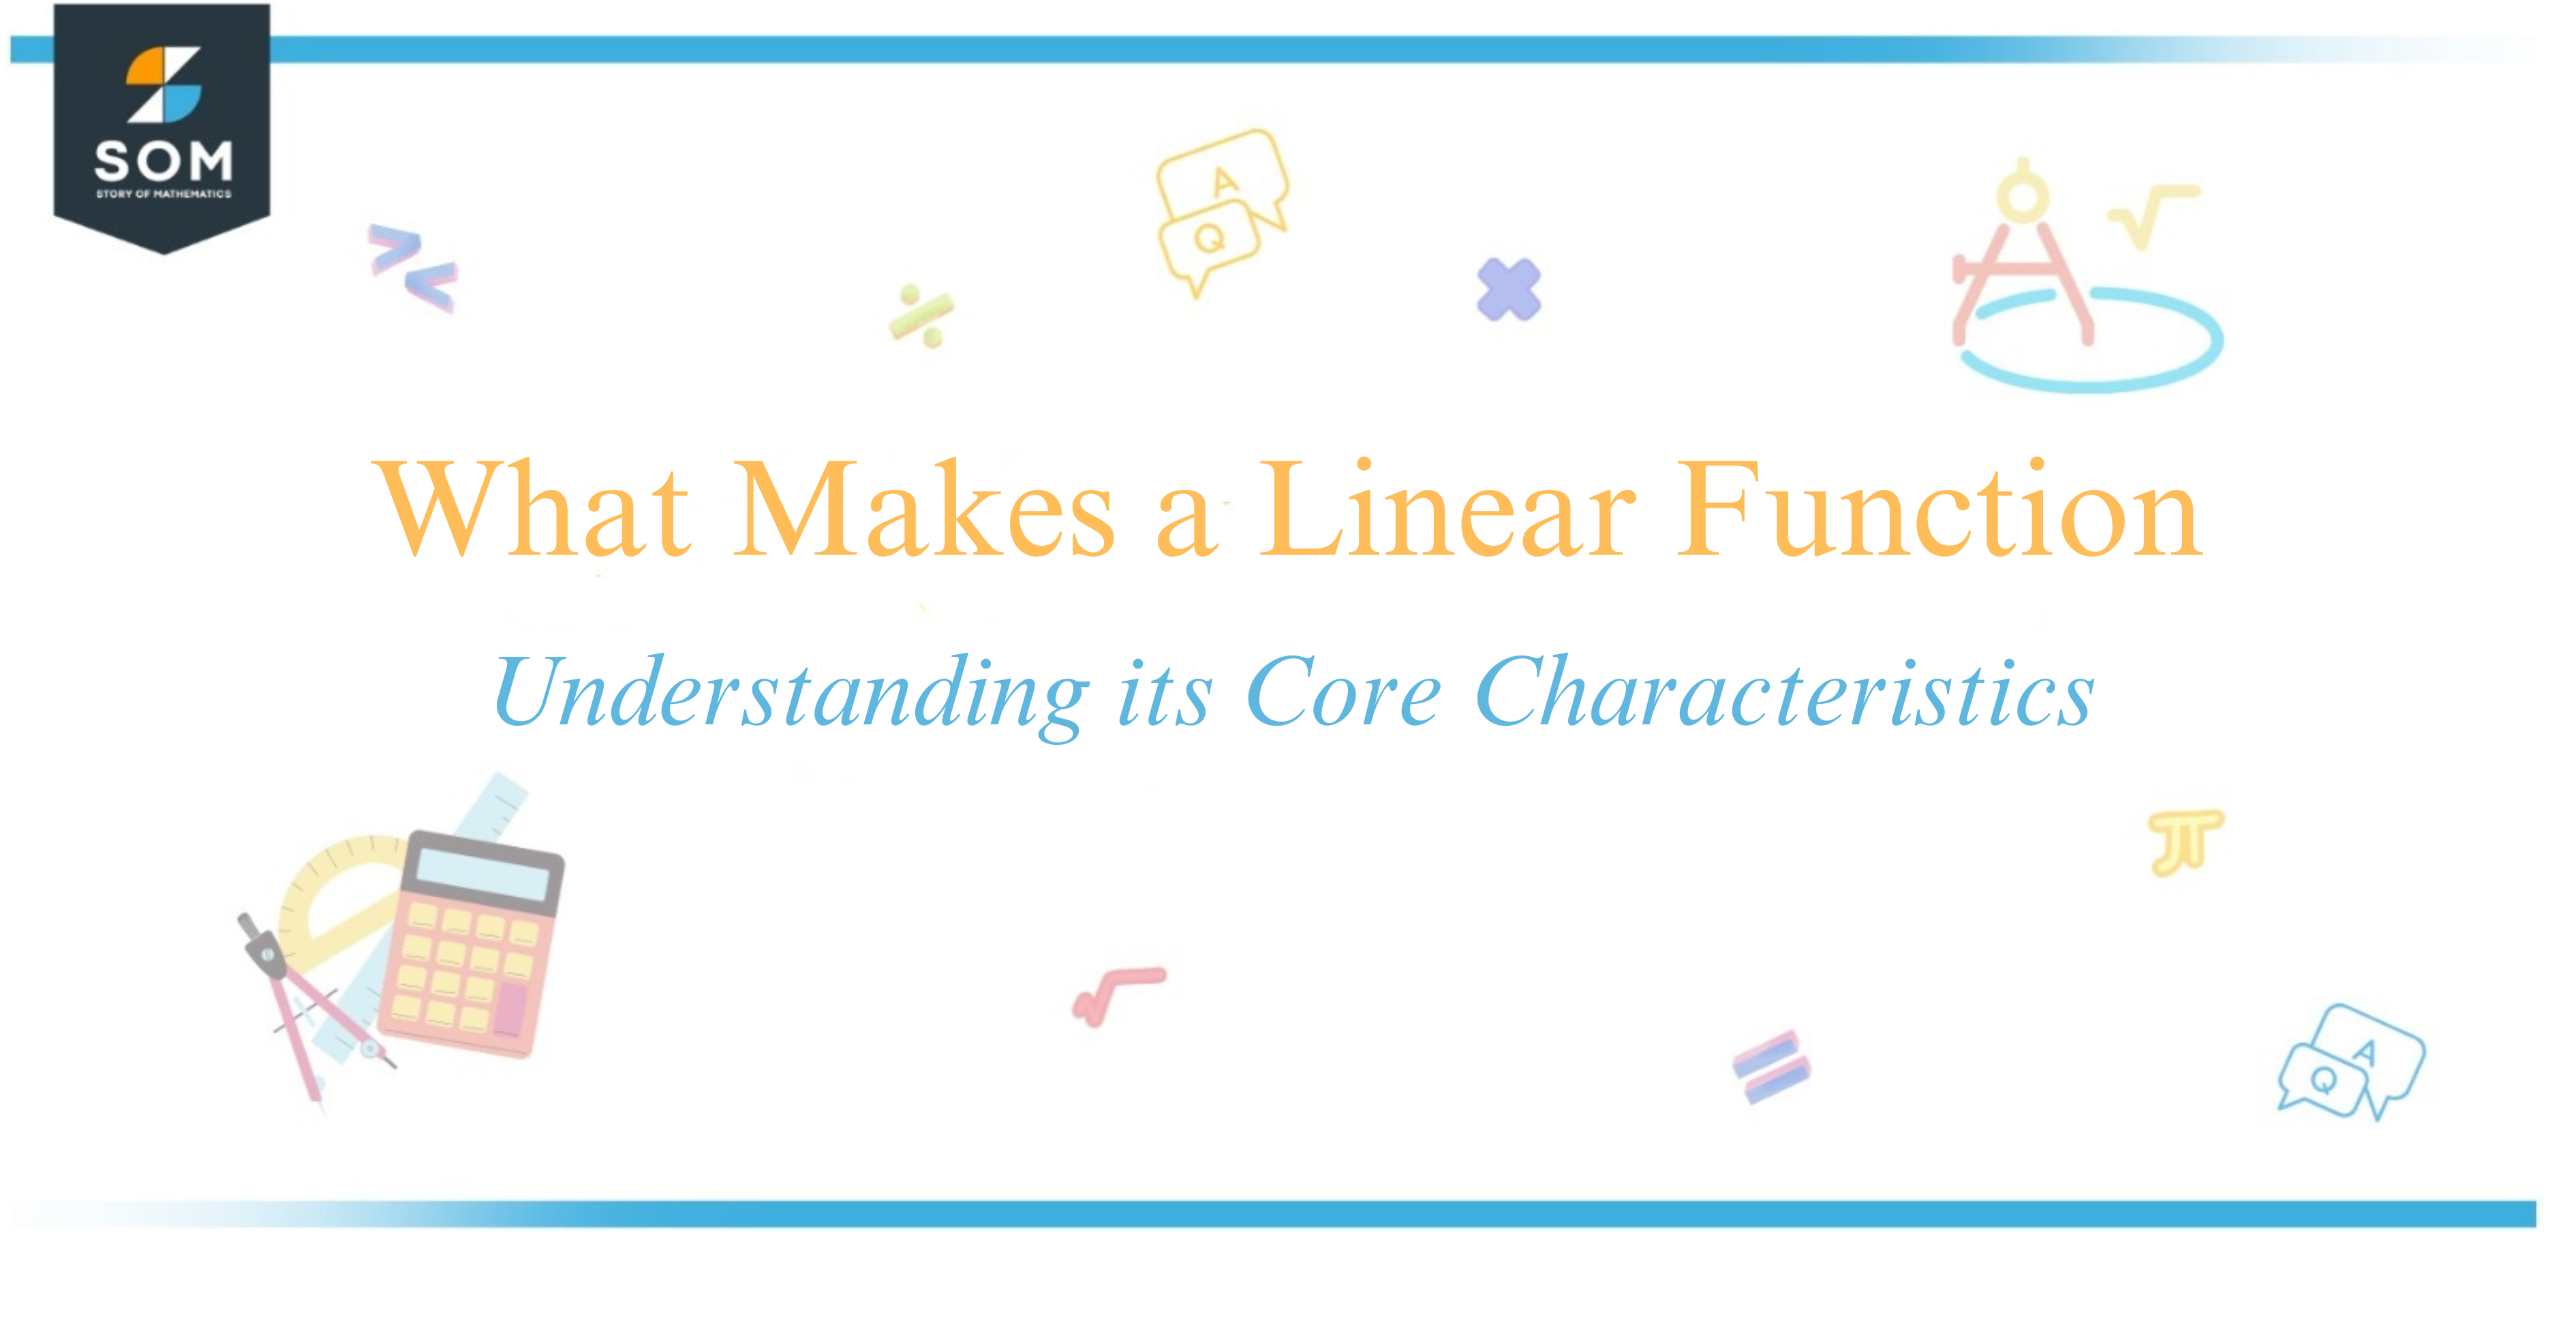 What Makes a Linear Function Understanding its Core Characteristics